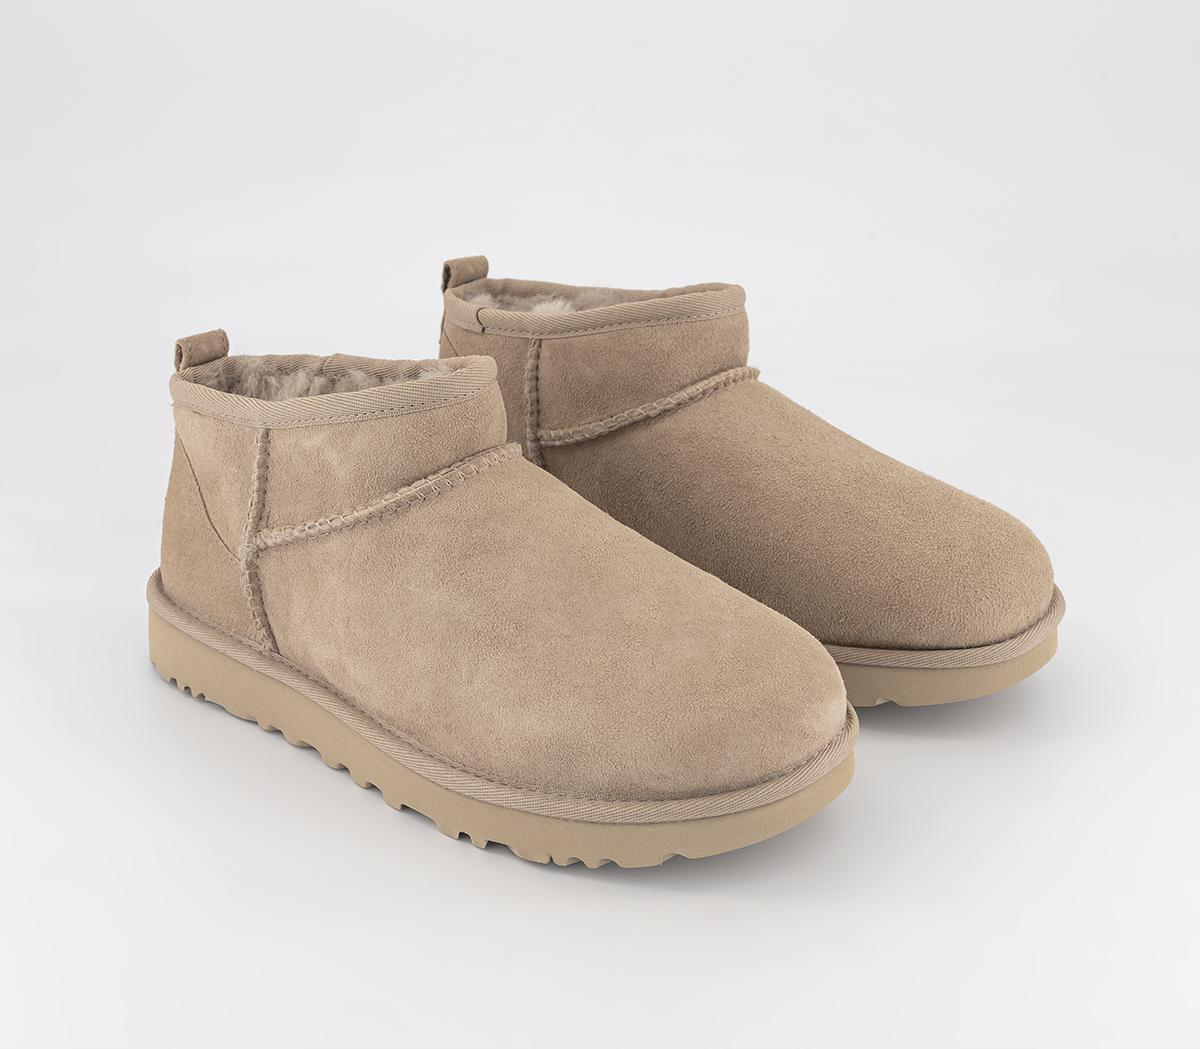 UGG Classic Ultra Mini Boots Driftwood - Women's Ankle Boots